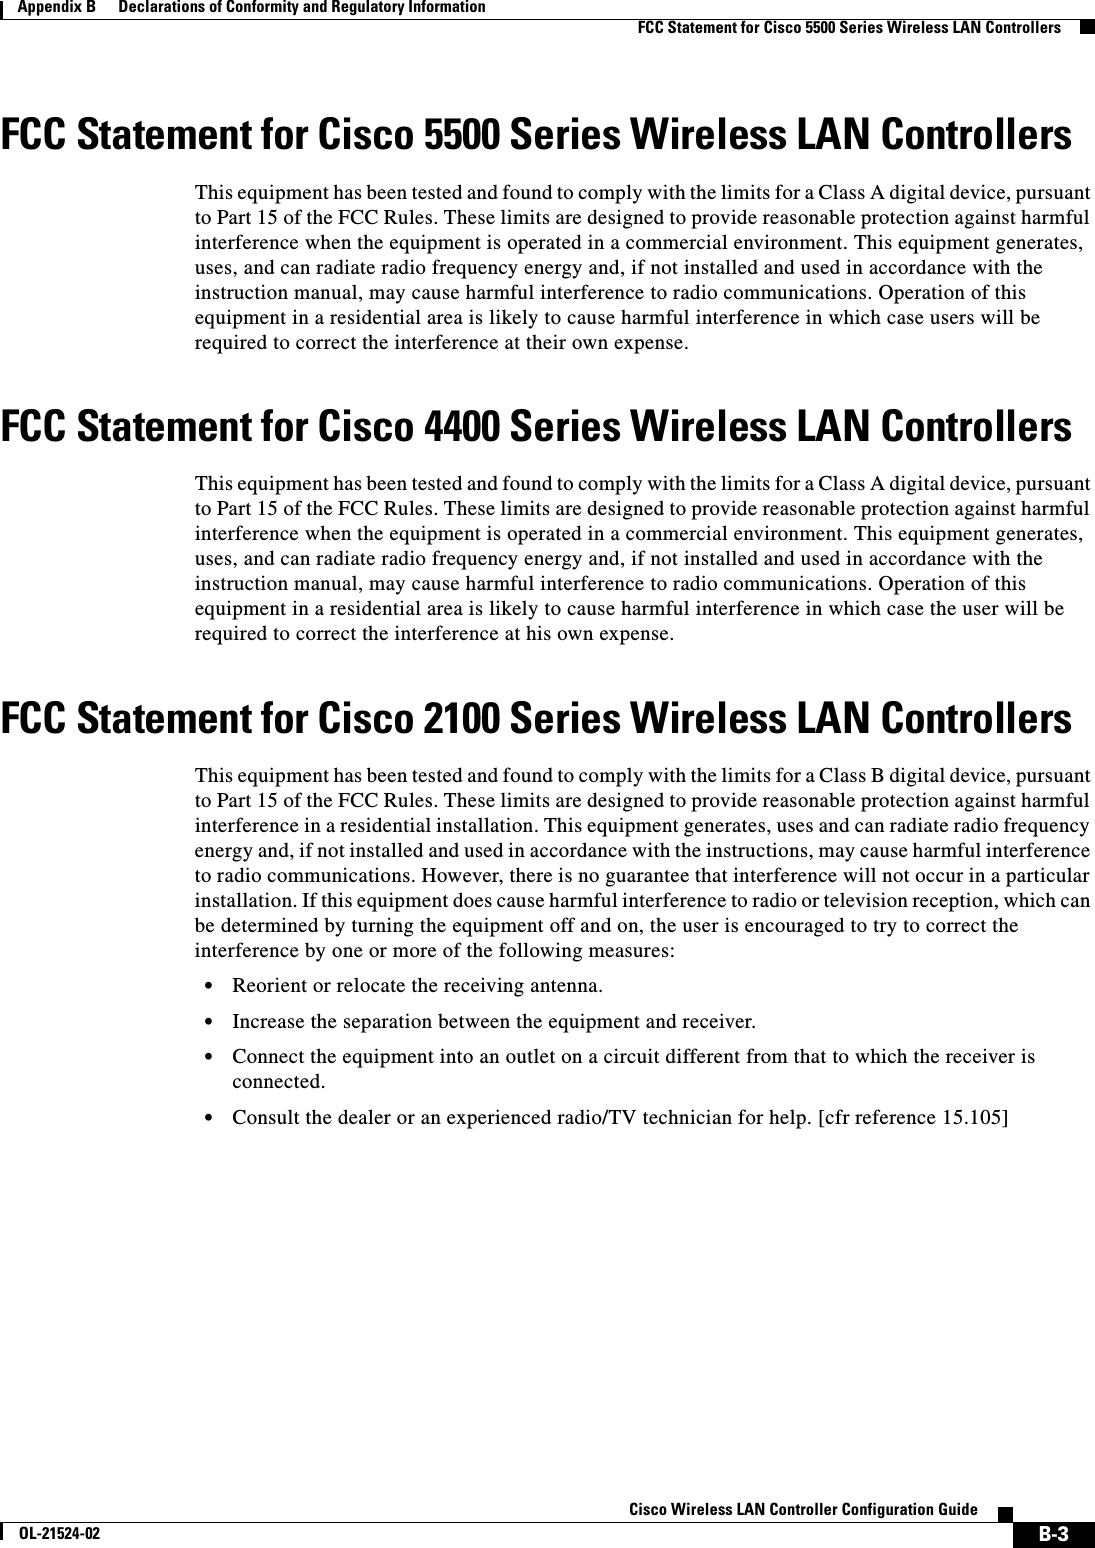  B-3Cisco Wireless LAN Controller Configuration GuideOL-21524-02Appendix B      Declarations of Conformity and Regulatory Information  FCC Statement for Cisco 5500 Series Wireless LAN ControllersFCC Statement for Cisco 5500 Series Wireless LAN ControllersThis equipment has been tested and found to comply with the limits for a Class A digital device, pursuant to Part 15 of the FCC Rules. These limits are designed to provide reasonable protection against harmful interference when the equipment is operated in a commercial environment. This equipment generates, uses, and can radiate radio frequency energy and, if not installed and used in accordance with the instruction manual, may cause harmful interference to radio communications. Operation of this equipment in a residential area is likely to cause harmful interference in which case users will be required to correct the interference at their own expense.FCC Statement for Cisco 4400 Series Wireless LAN ControllersThis equipment has been tested and found to comply with the limits for a Class A digital device, pursuant to Part 15 of the FCC Rules. These limits are designed to provide reasonable protection against harmful interference when the equipment is operated in a commercial environment. This equipment generates, uses, and can radiate radio frequency energy and, if not installed and used in accordance with the instruction manual, may cause harmful interference to radio communications. Operation of this equipment in a residential area is likely to cause harmful interference in which case the user will be required to correct the interference at his own expense.FCC Statement for Cisco 2100 Series Wireless LAN ControllersThis equipment has been tested and found to comply with the limits for a Class B digital device, pursuant to Part 15 of the FCC Rules. These limits are designed to provide reasonable protection against harmful interference in a residential installation. This equipment generates, uses and can radiate radio frequency energy and, if not installed and used in accordance with the instructions, may cause harmful interference to radio communications. However, there is no guarantee that interference will not occur in a particular installation. If this equipment does cause harmful interference to radio or television reception, which can be determined by turning the equipment off and on, the user is encouraged to try to correct the interference by one or more of the following measures:  • Reorient or relocate the receiving antenna.  • Increase the separation between the equipment and receiver.  • Connect the equipment into an outlet on a circuit different from that to which the receiver is connected.  • Consult the dealer or an experienced radio/TV technician for help. [cfr reference 15.105]